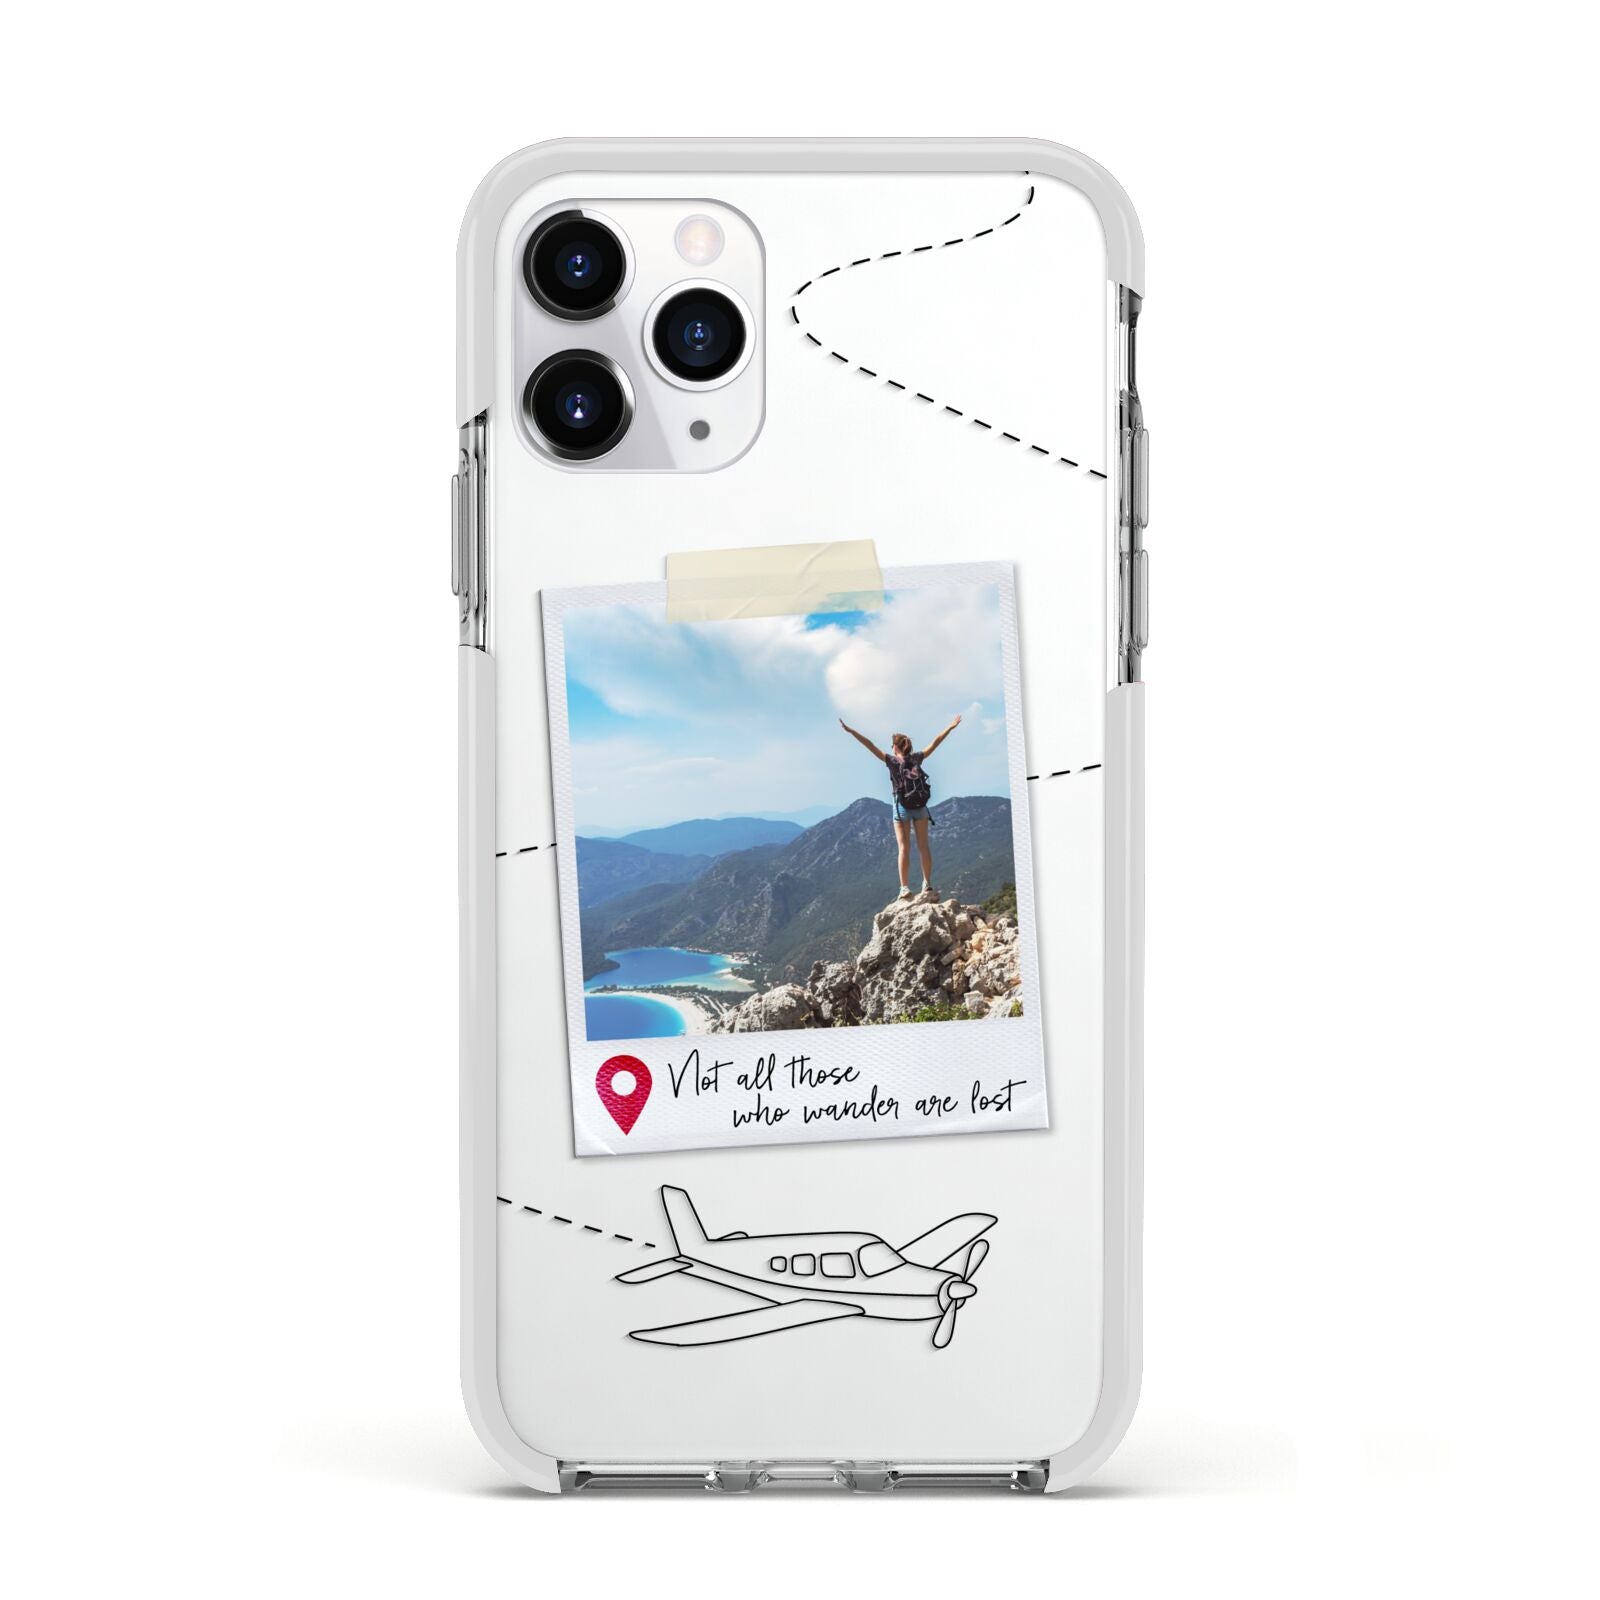 Backpacker Photo Upload Personalised Apple iPhone 11 Pro in Silver with White Impact Case